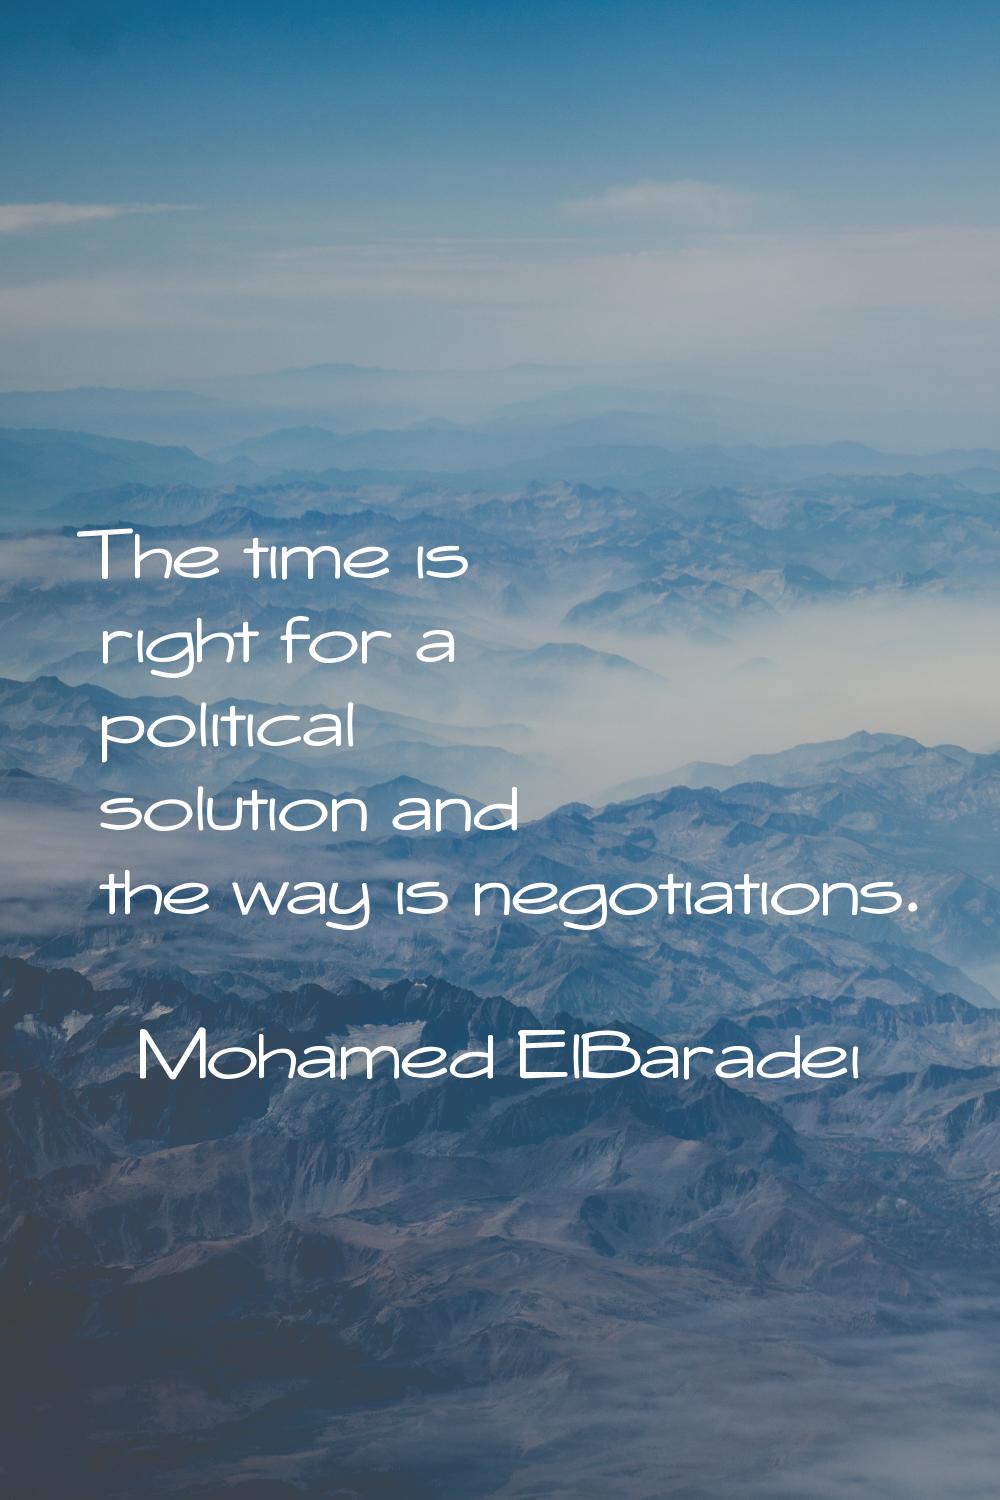 The time is right for a political solution and the way is negotiations.